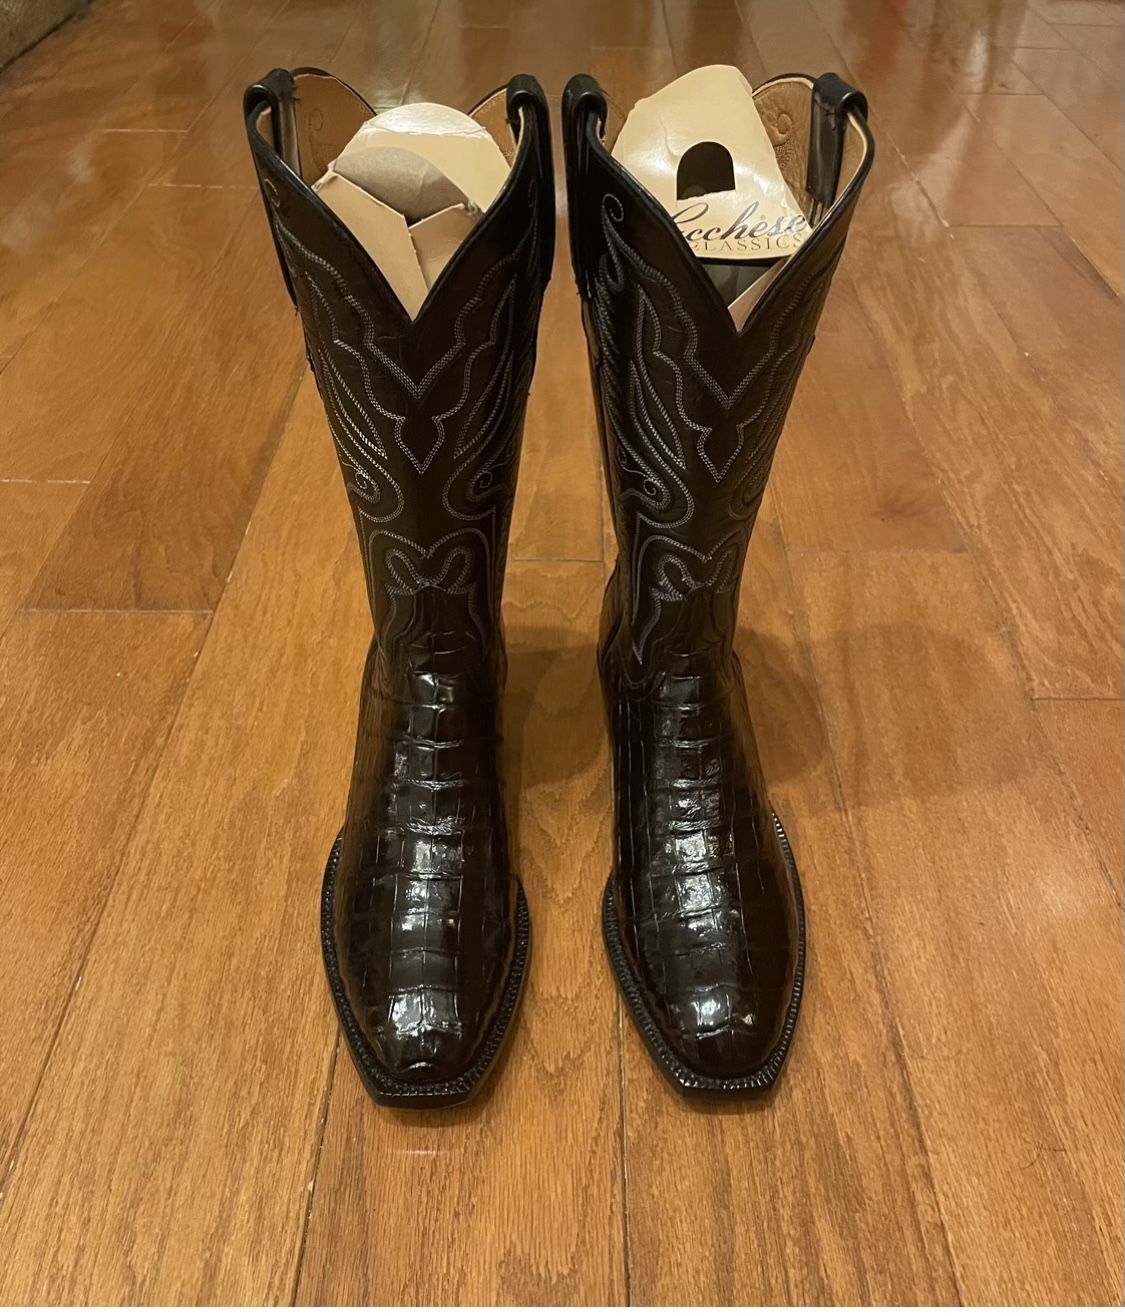  Lucchese Boots